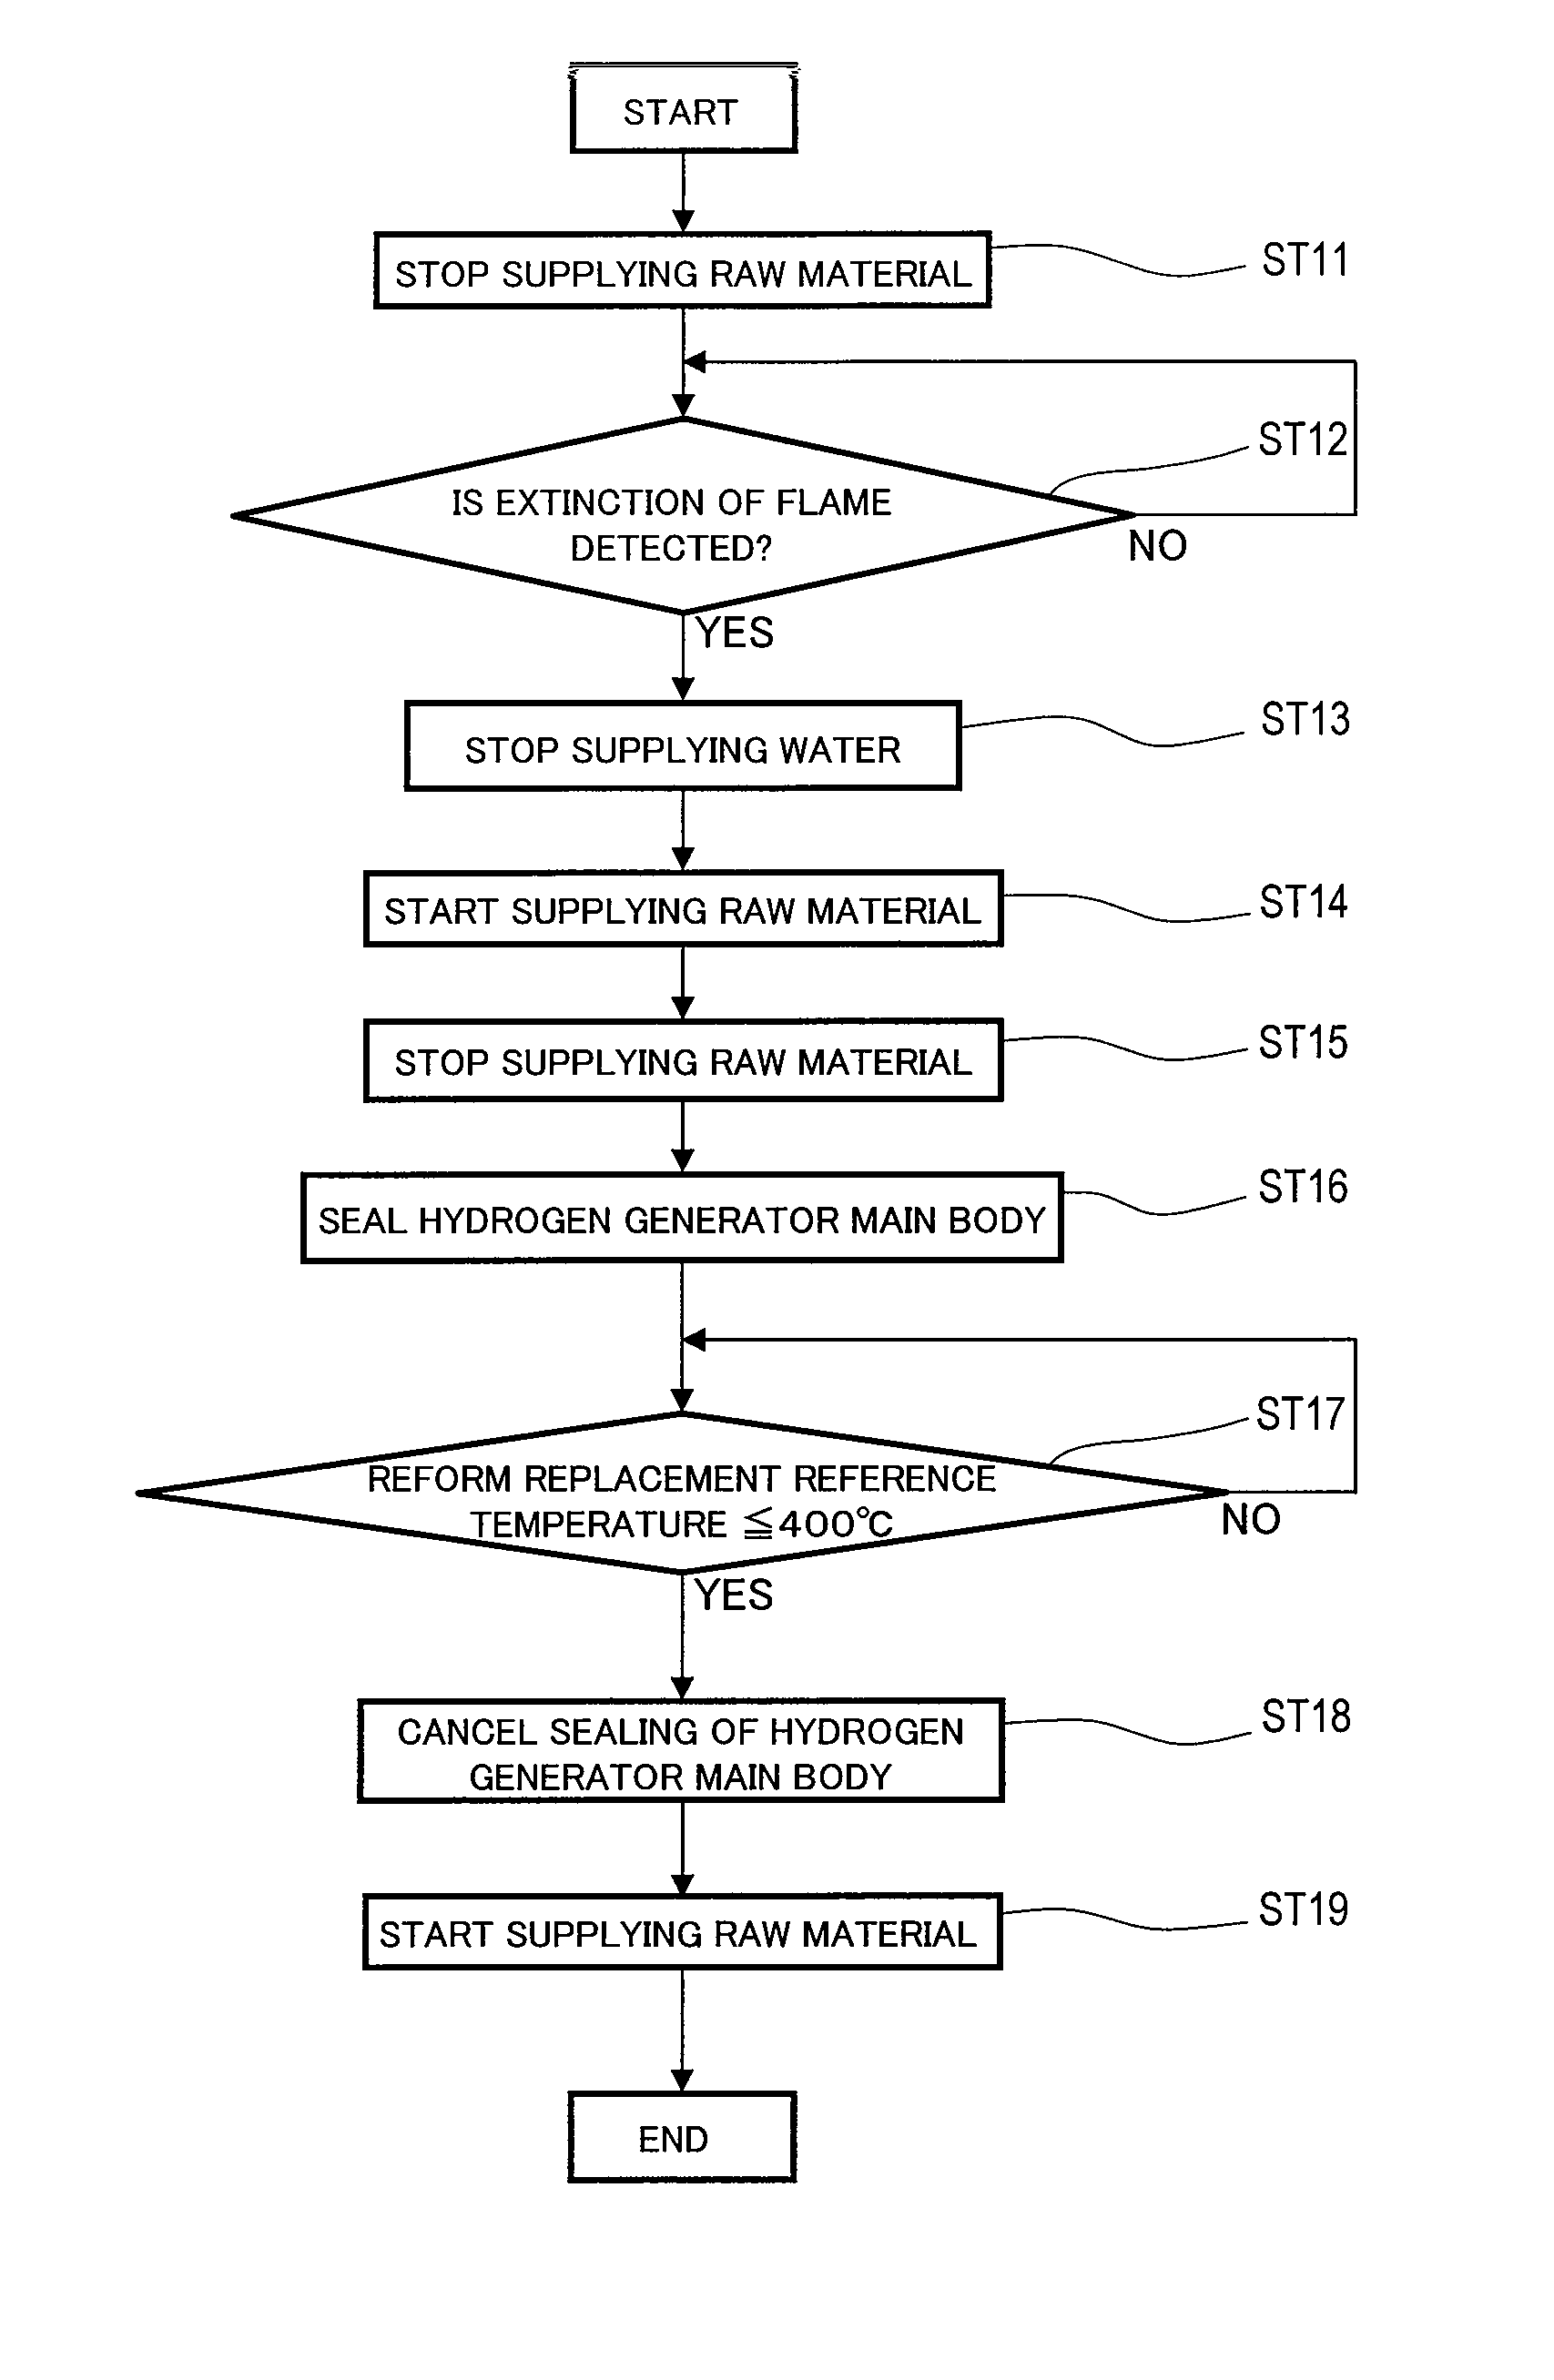 Method for stopping a hydrogen generator by controlling water supply to a reformer